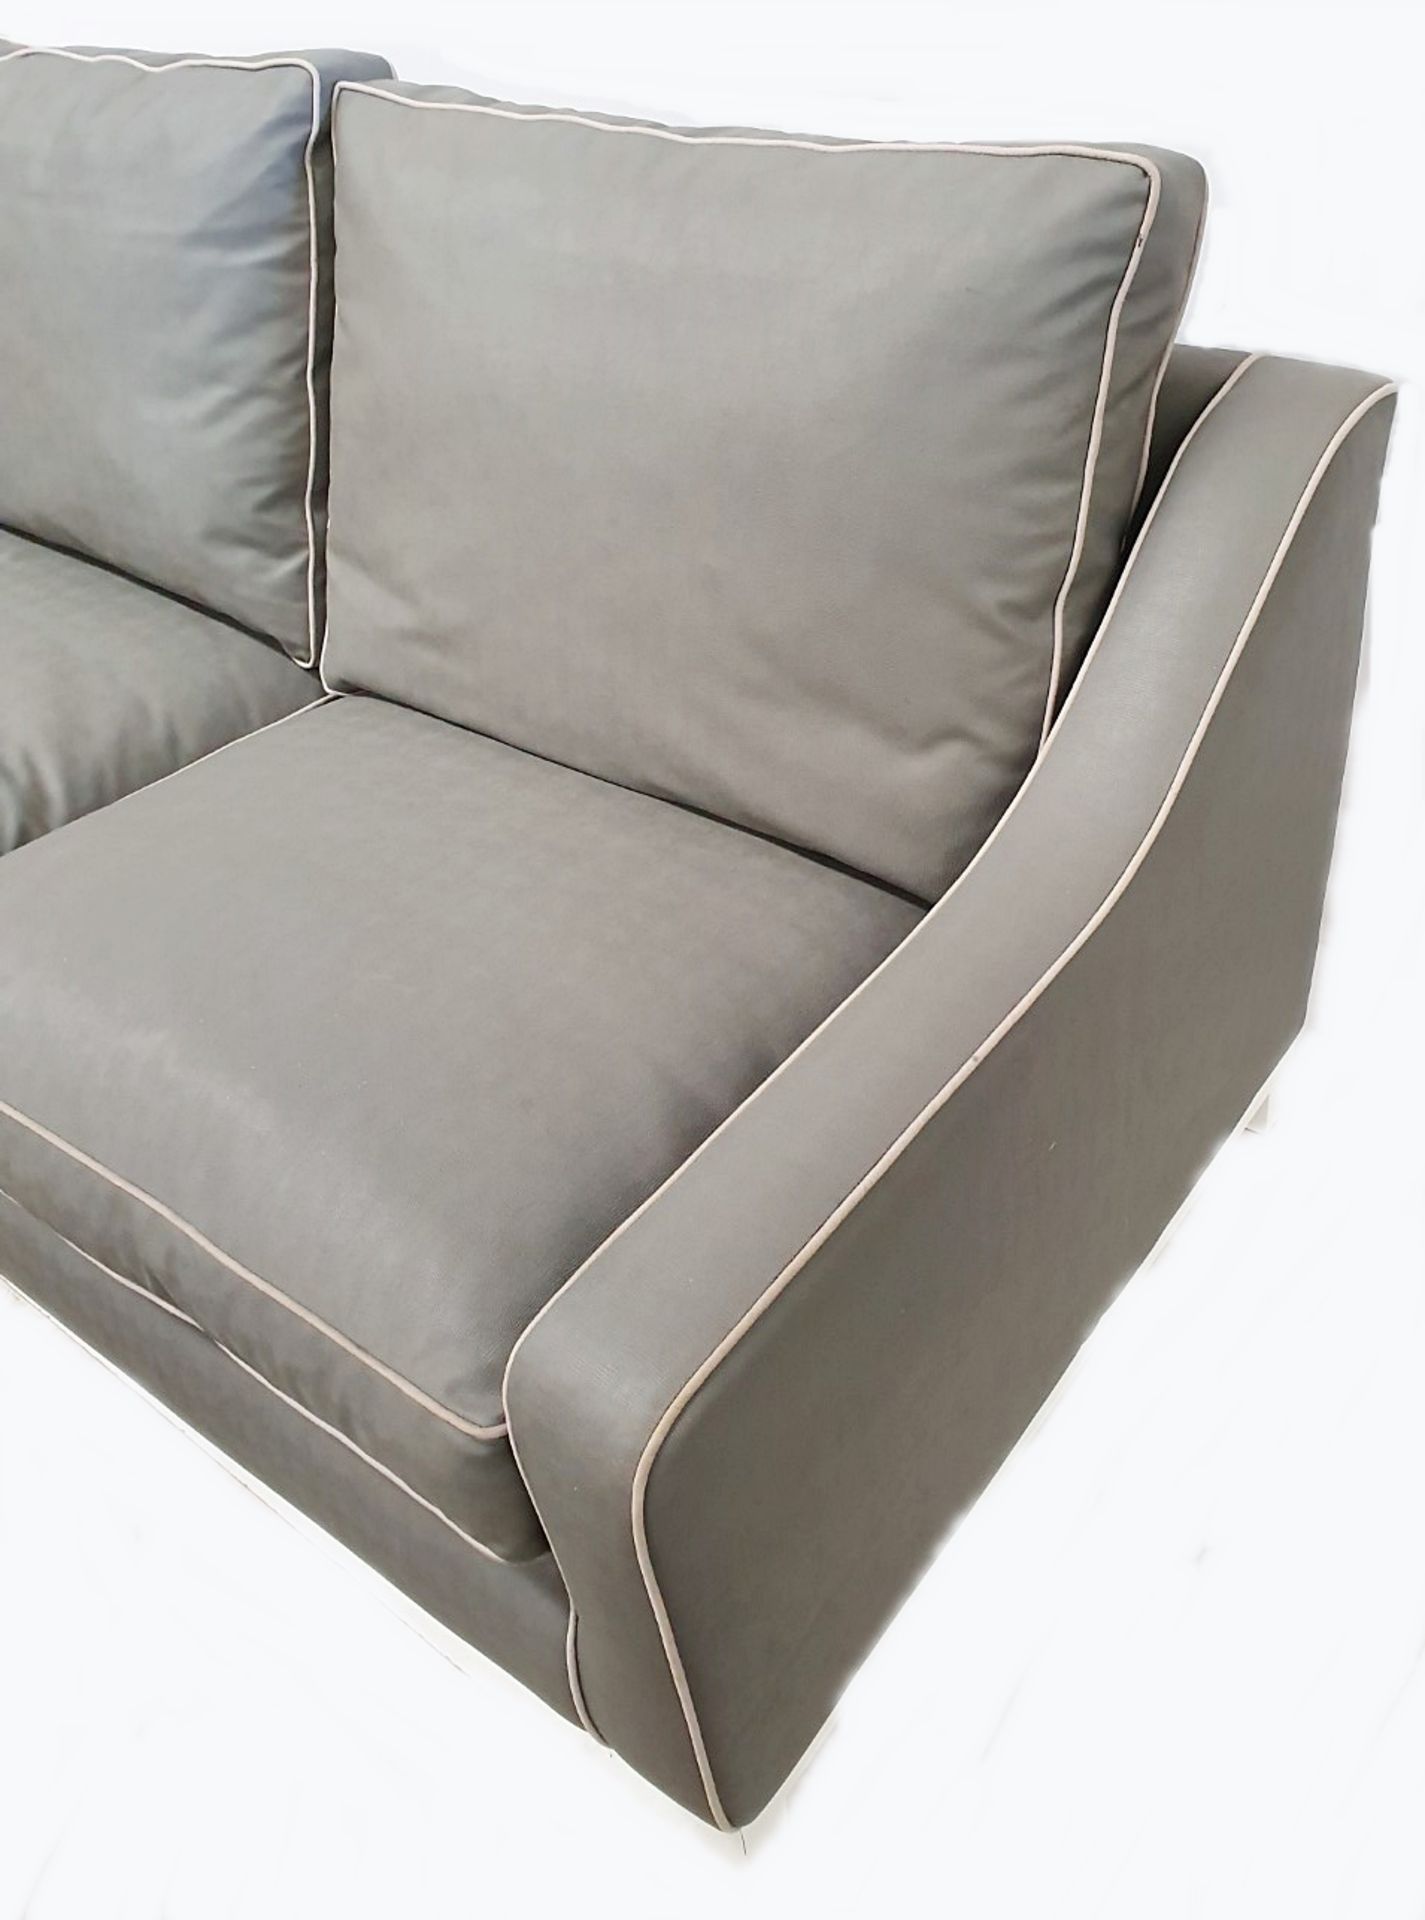 1 x Contemporary 2-Seater Grey Leather Sofa - CL380 - Ref: H581 - Location: Altrincham WA14 - NO VAT - Image 9 of 14